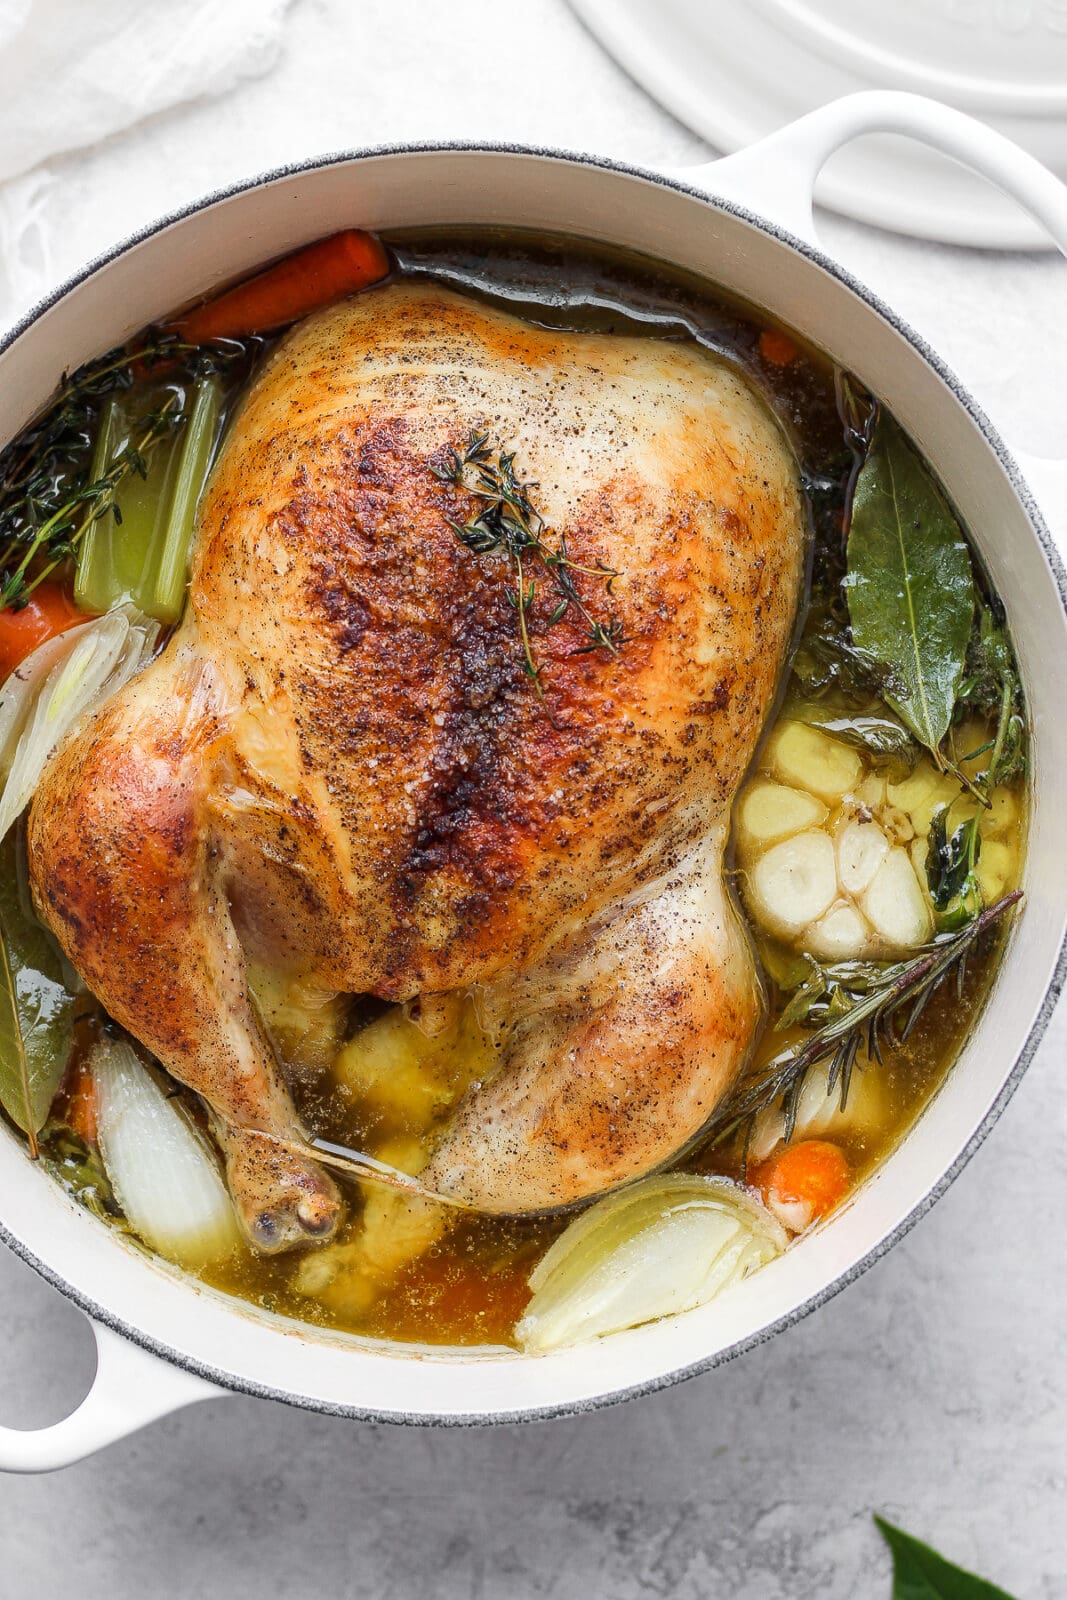 Dutch Oven with a roasted chicken inside surrounded by broth, vegetables and herbs.